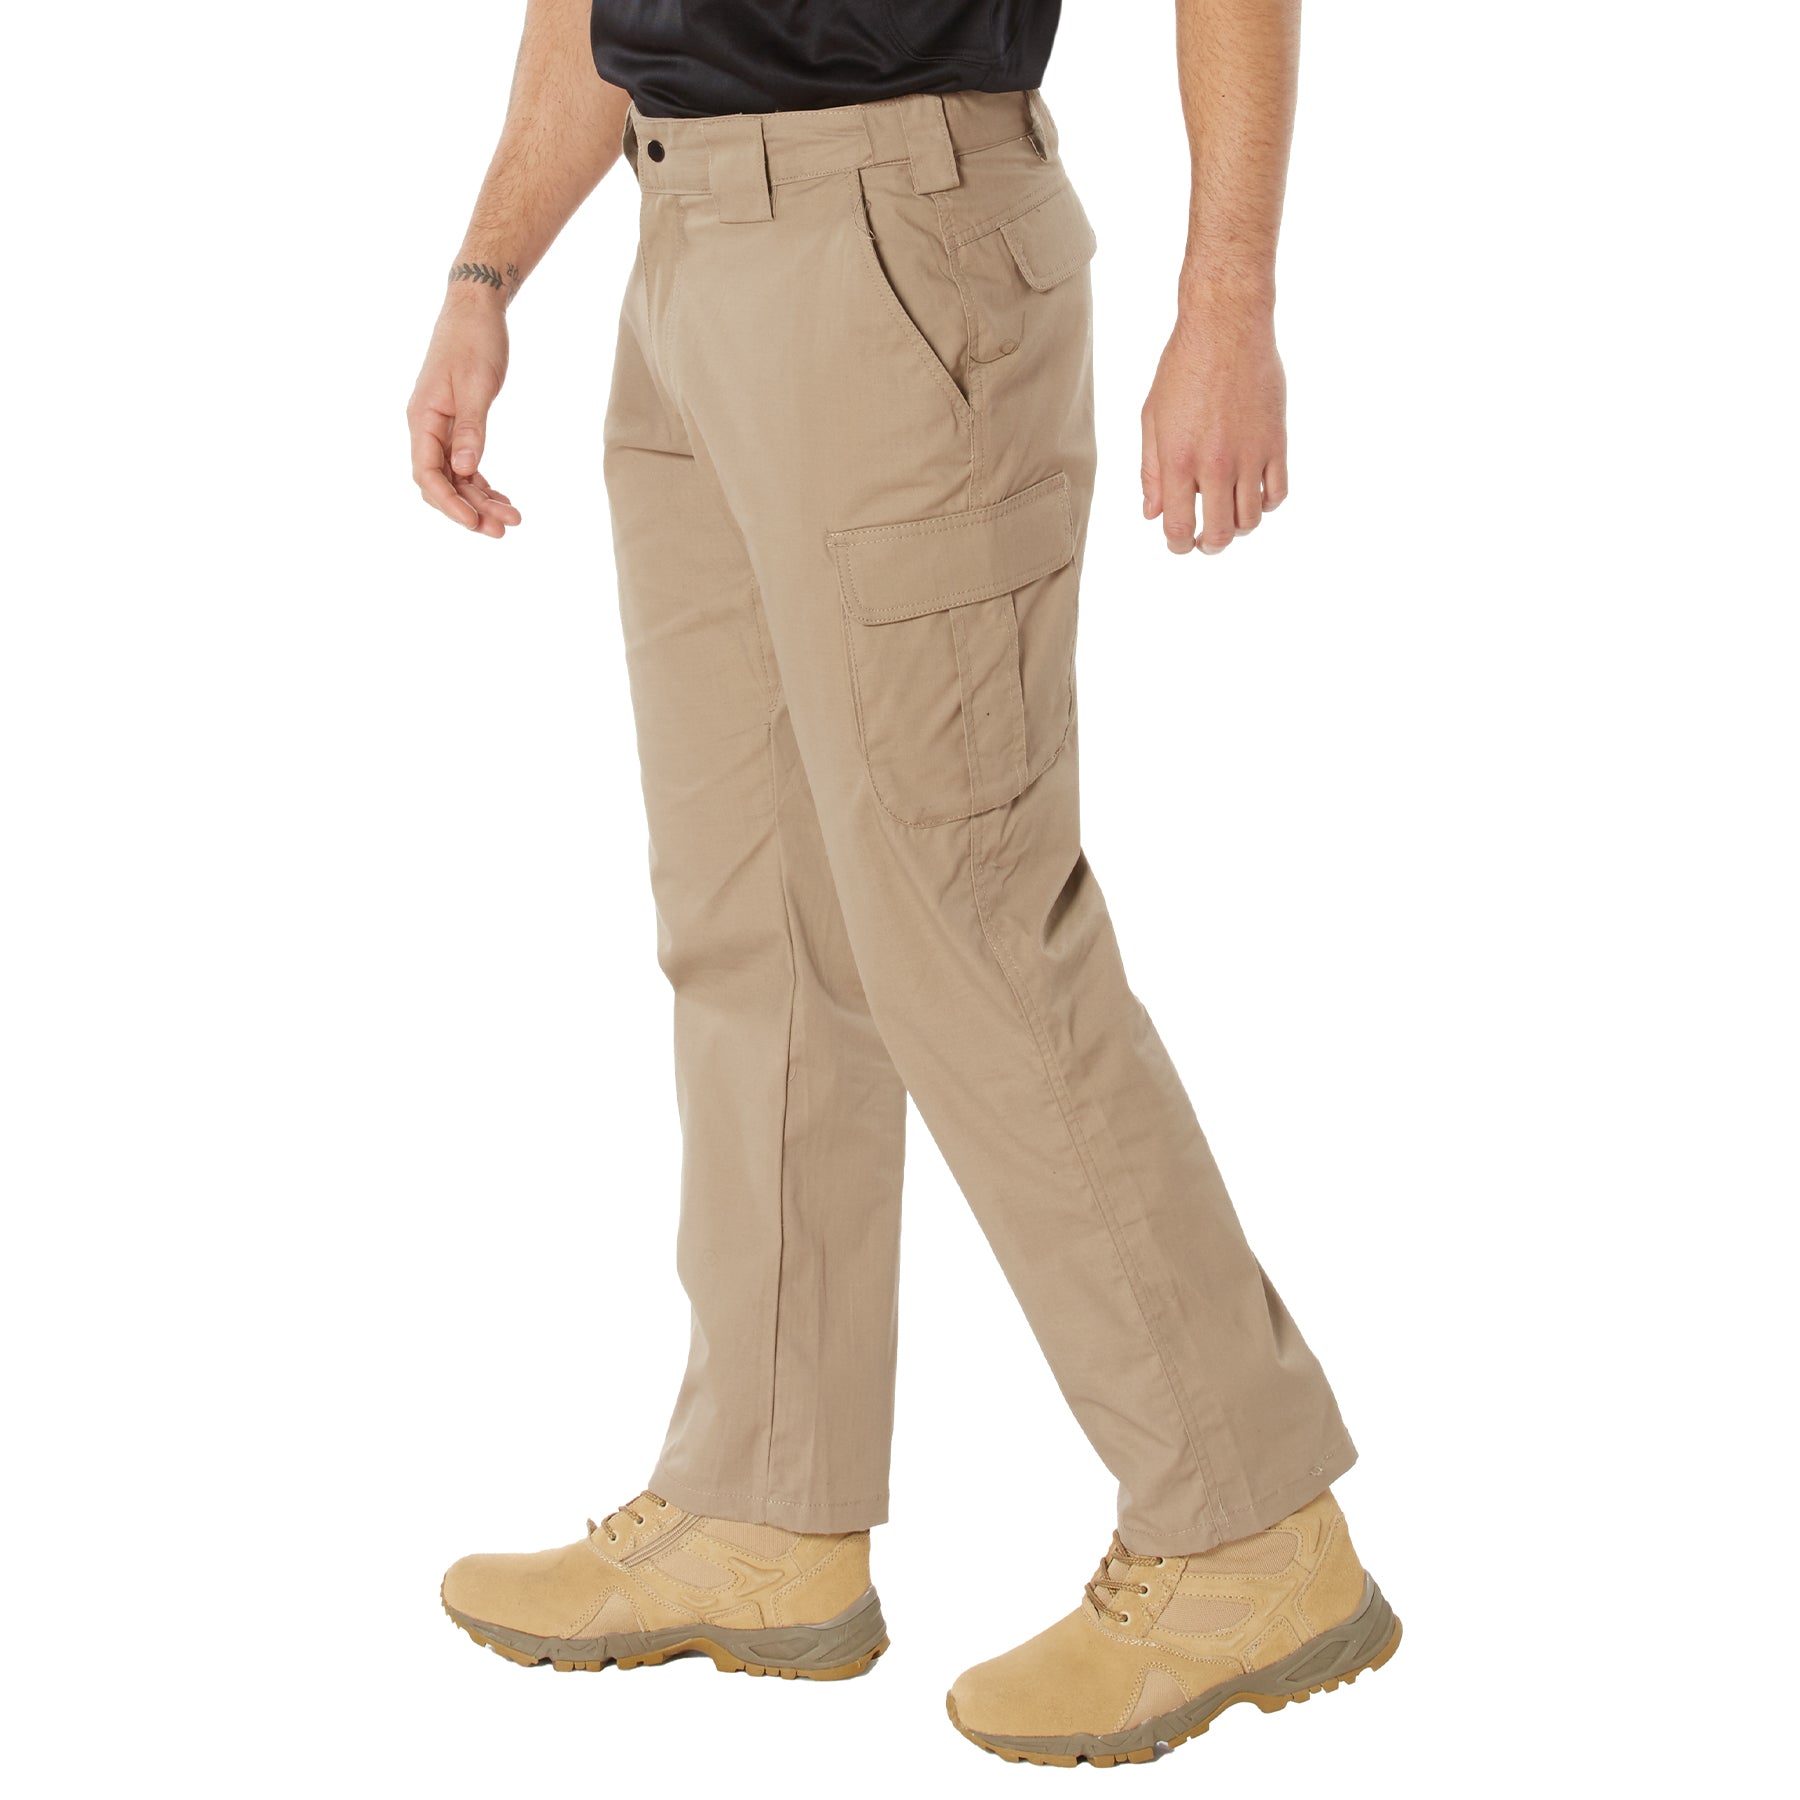 10-8 Lightweight Poly/Cotton/Spandex Rip-Stop Field Tactical Pants